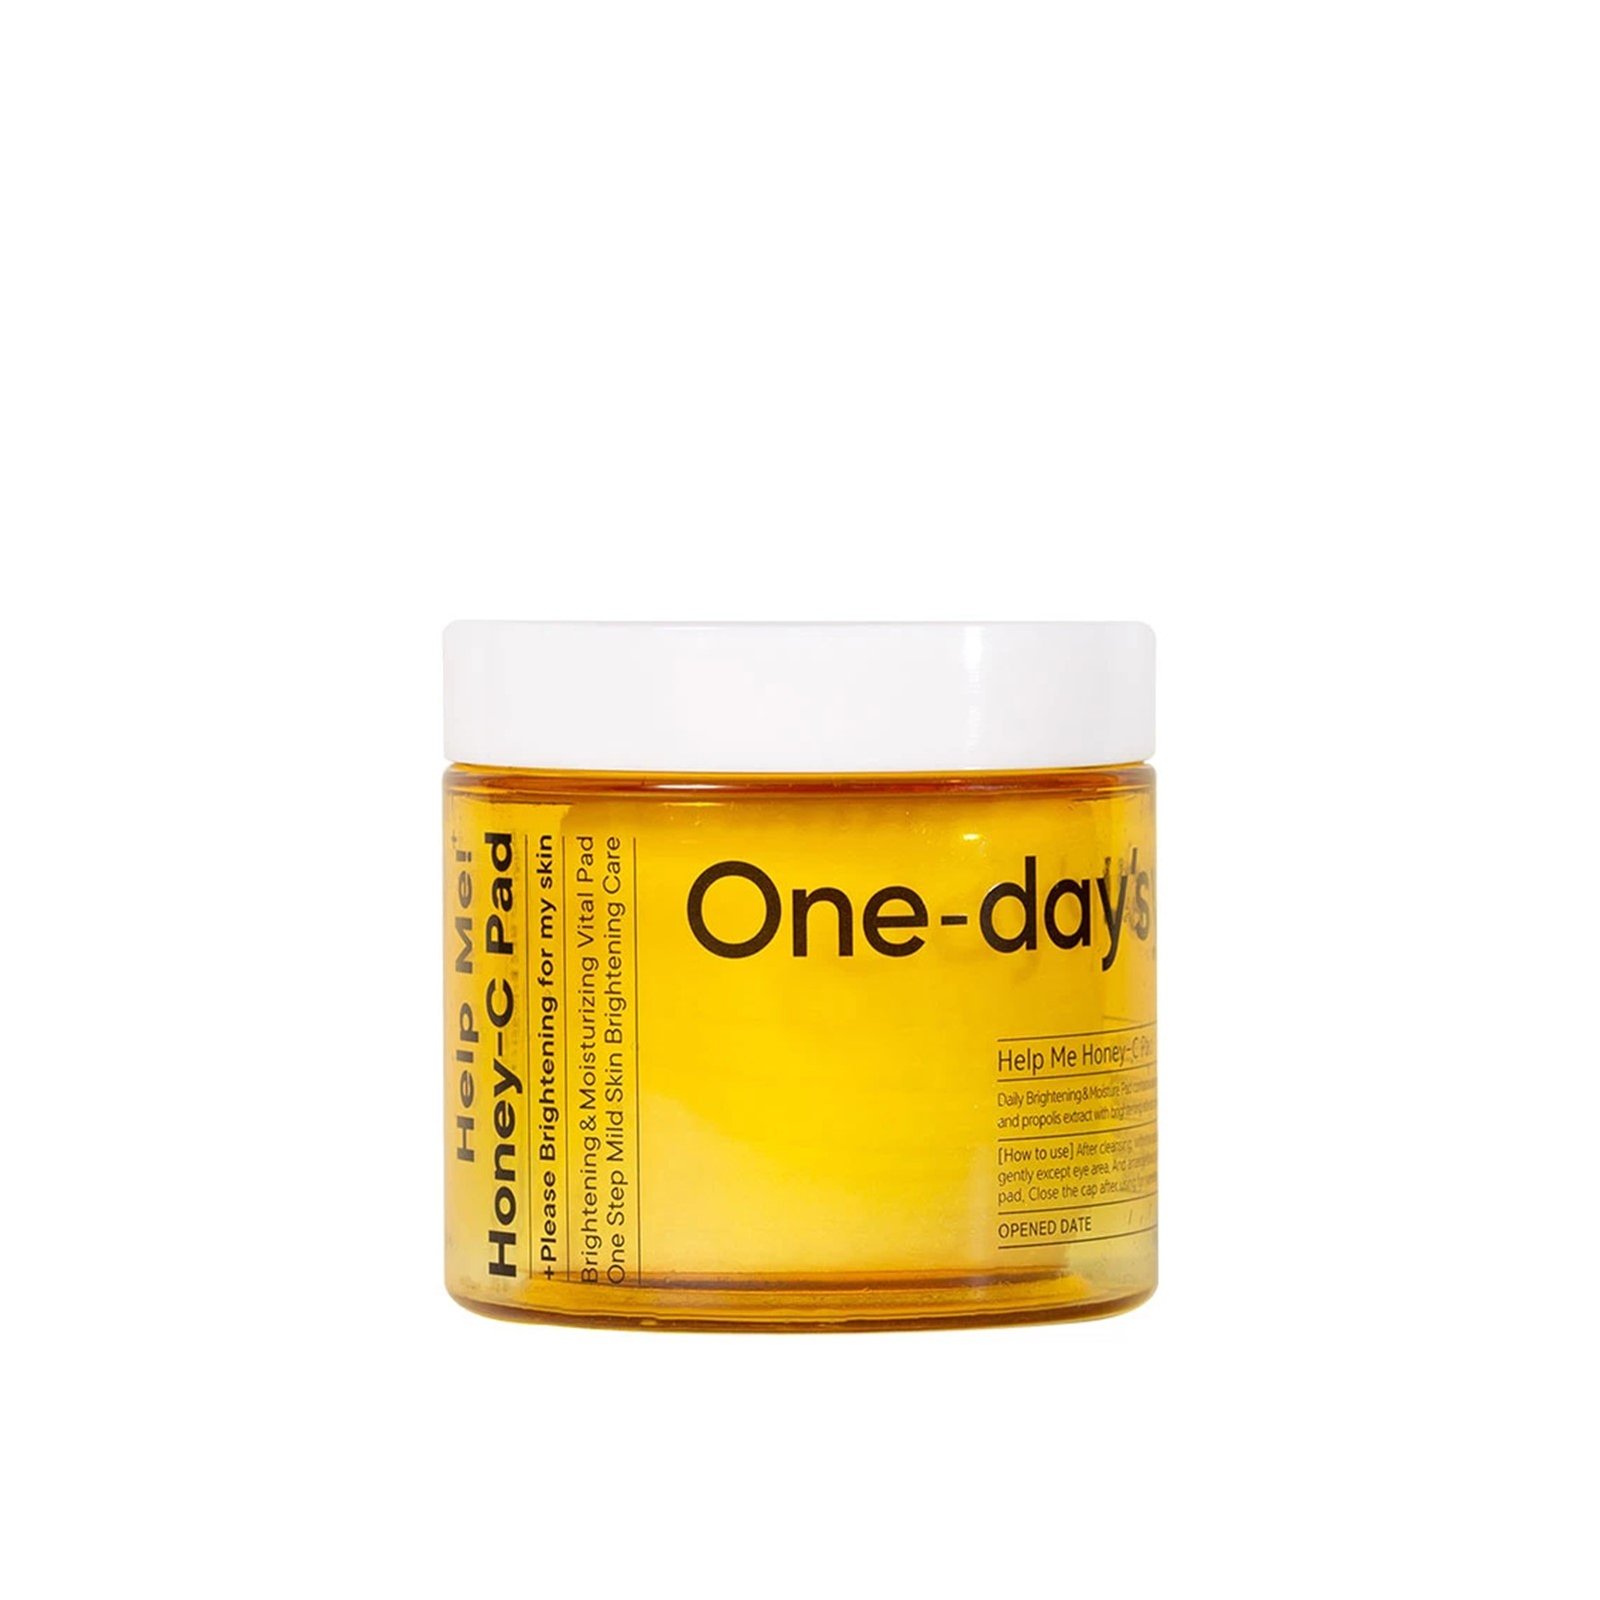 One-day's you Help Me Brightening Honey-C Pad